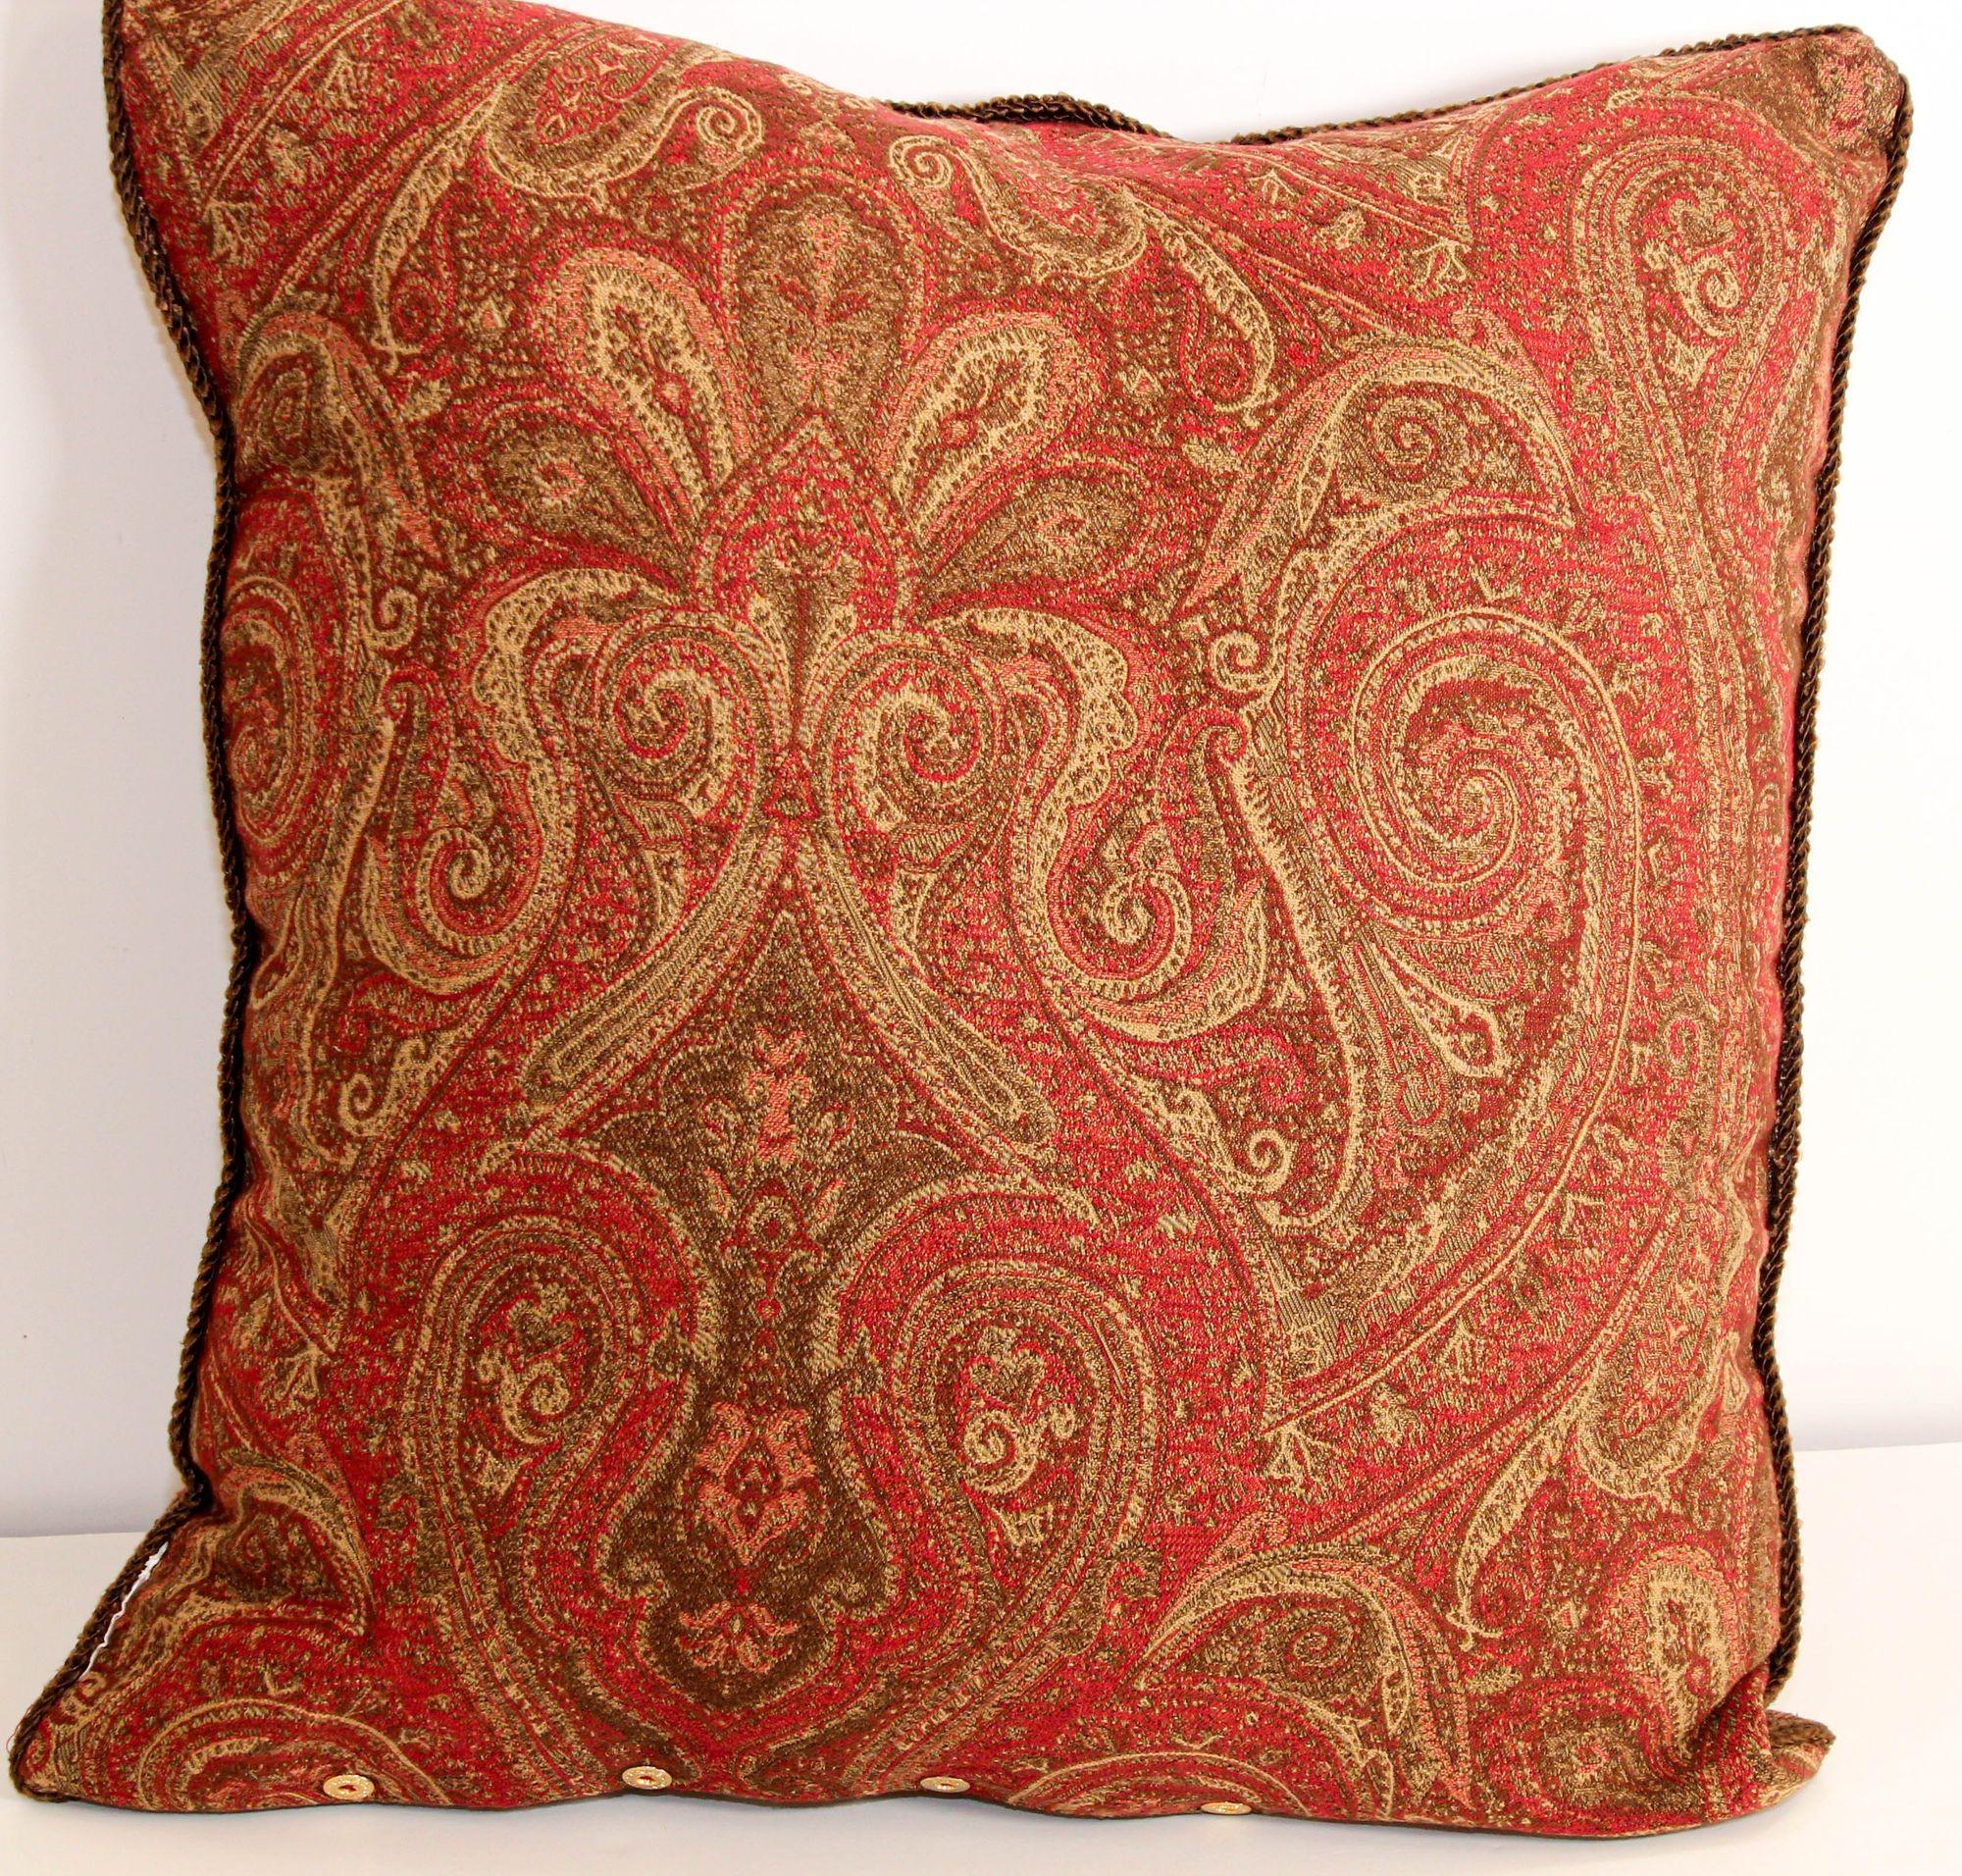 Anglo-Indian Ralph Lauren Pillow in Red and Gold Paisley RL Crown Logo